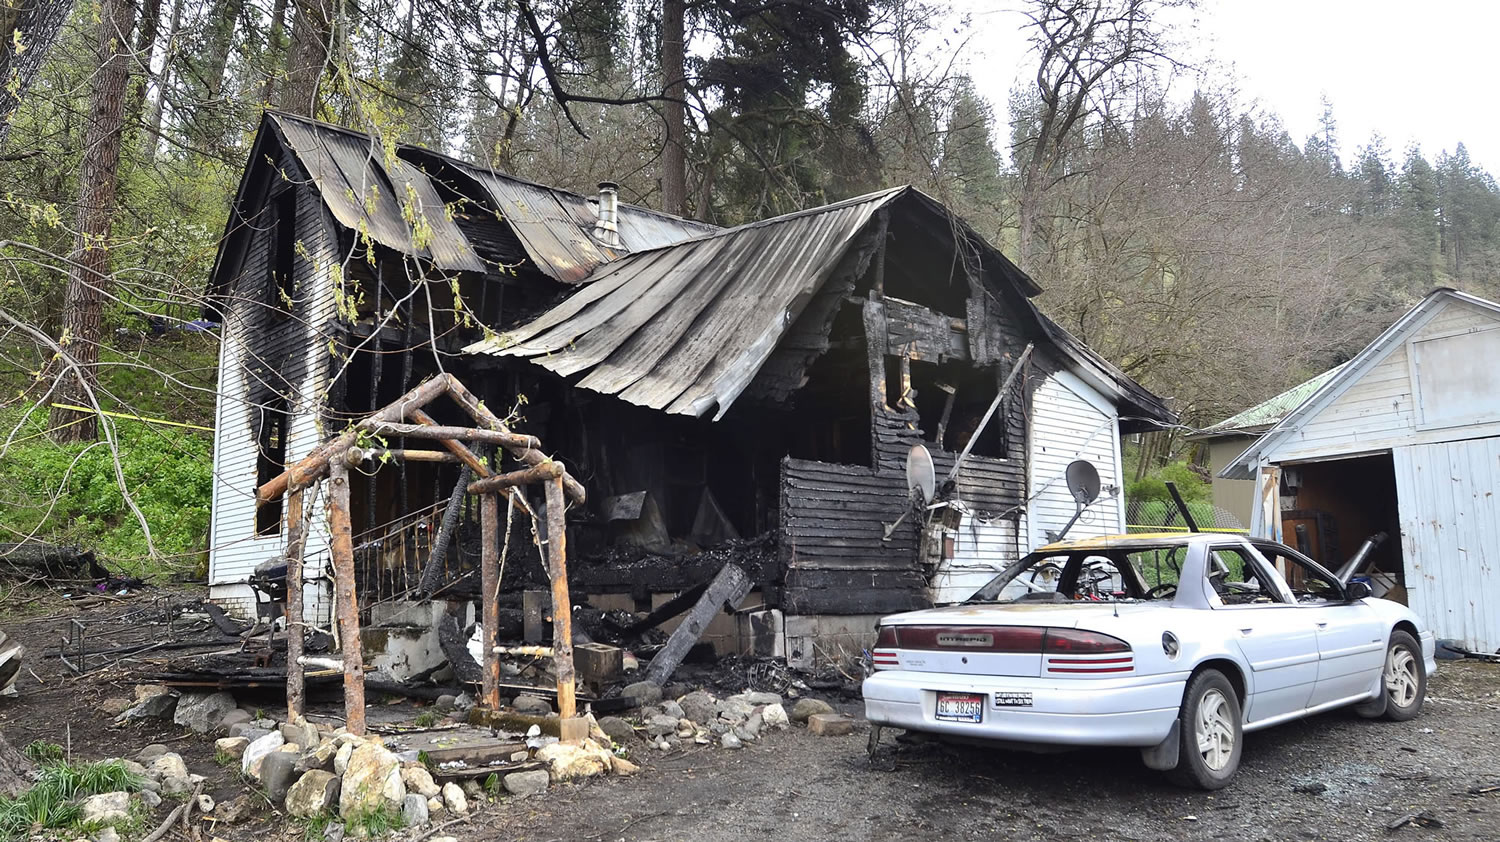 An extension cord hooked to an electric grill on a porch in Orofino, Idaho, shorted out sometime between 10 p.m. Friday and 1:30 a.m. Saturday and burned this house, a northern Idaho fire official said.